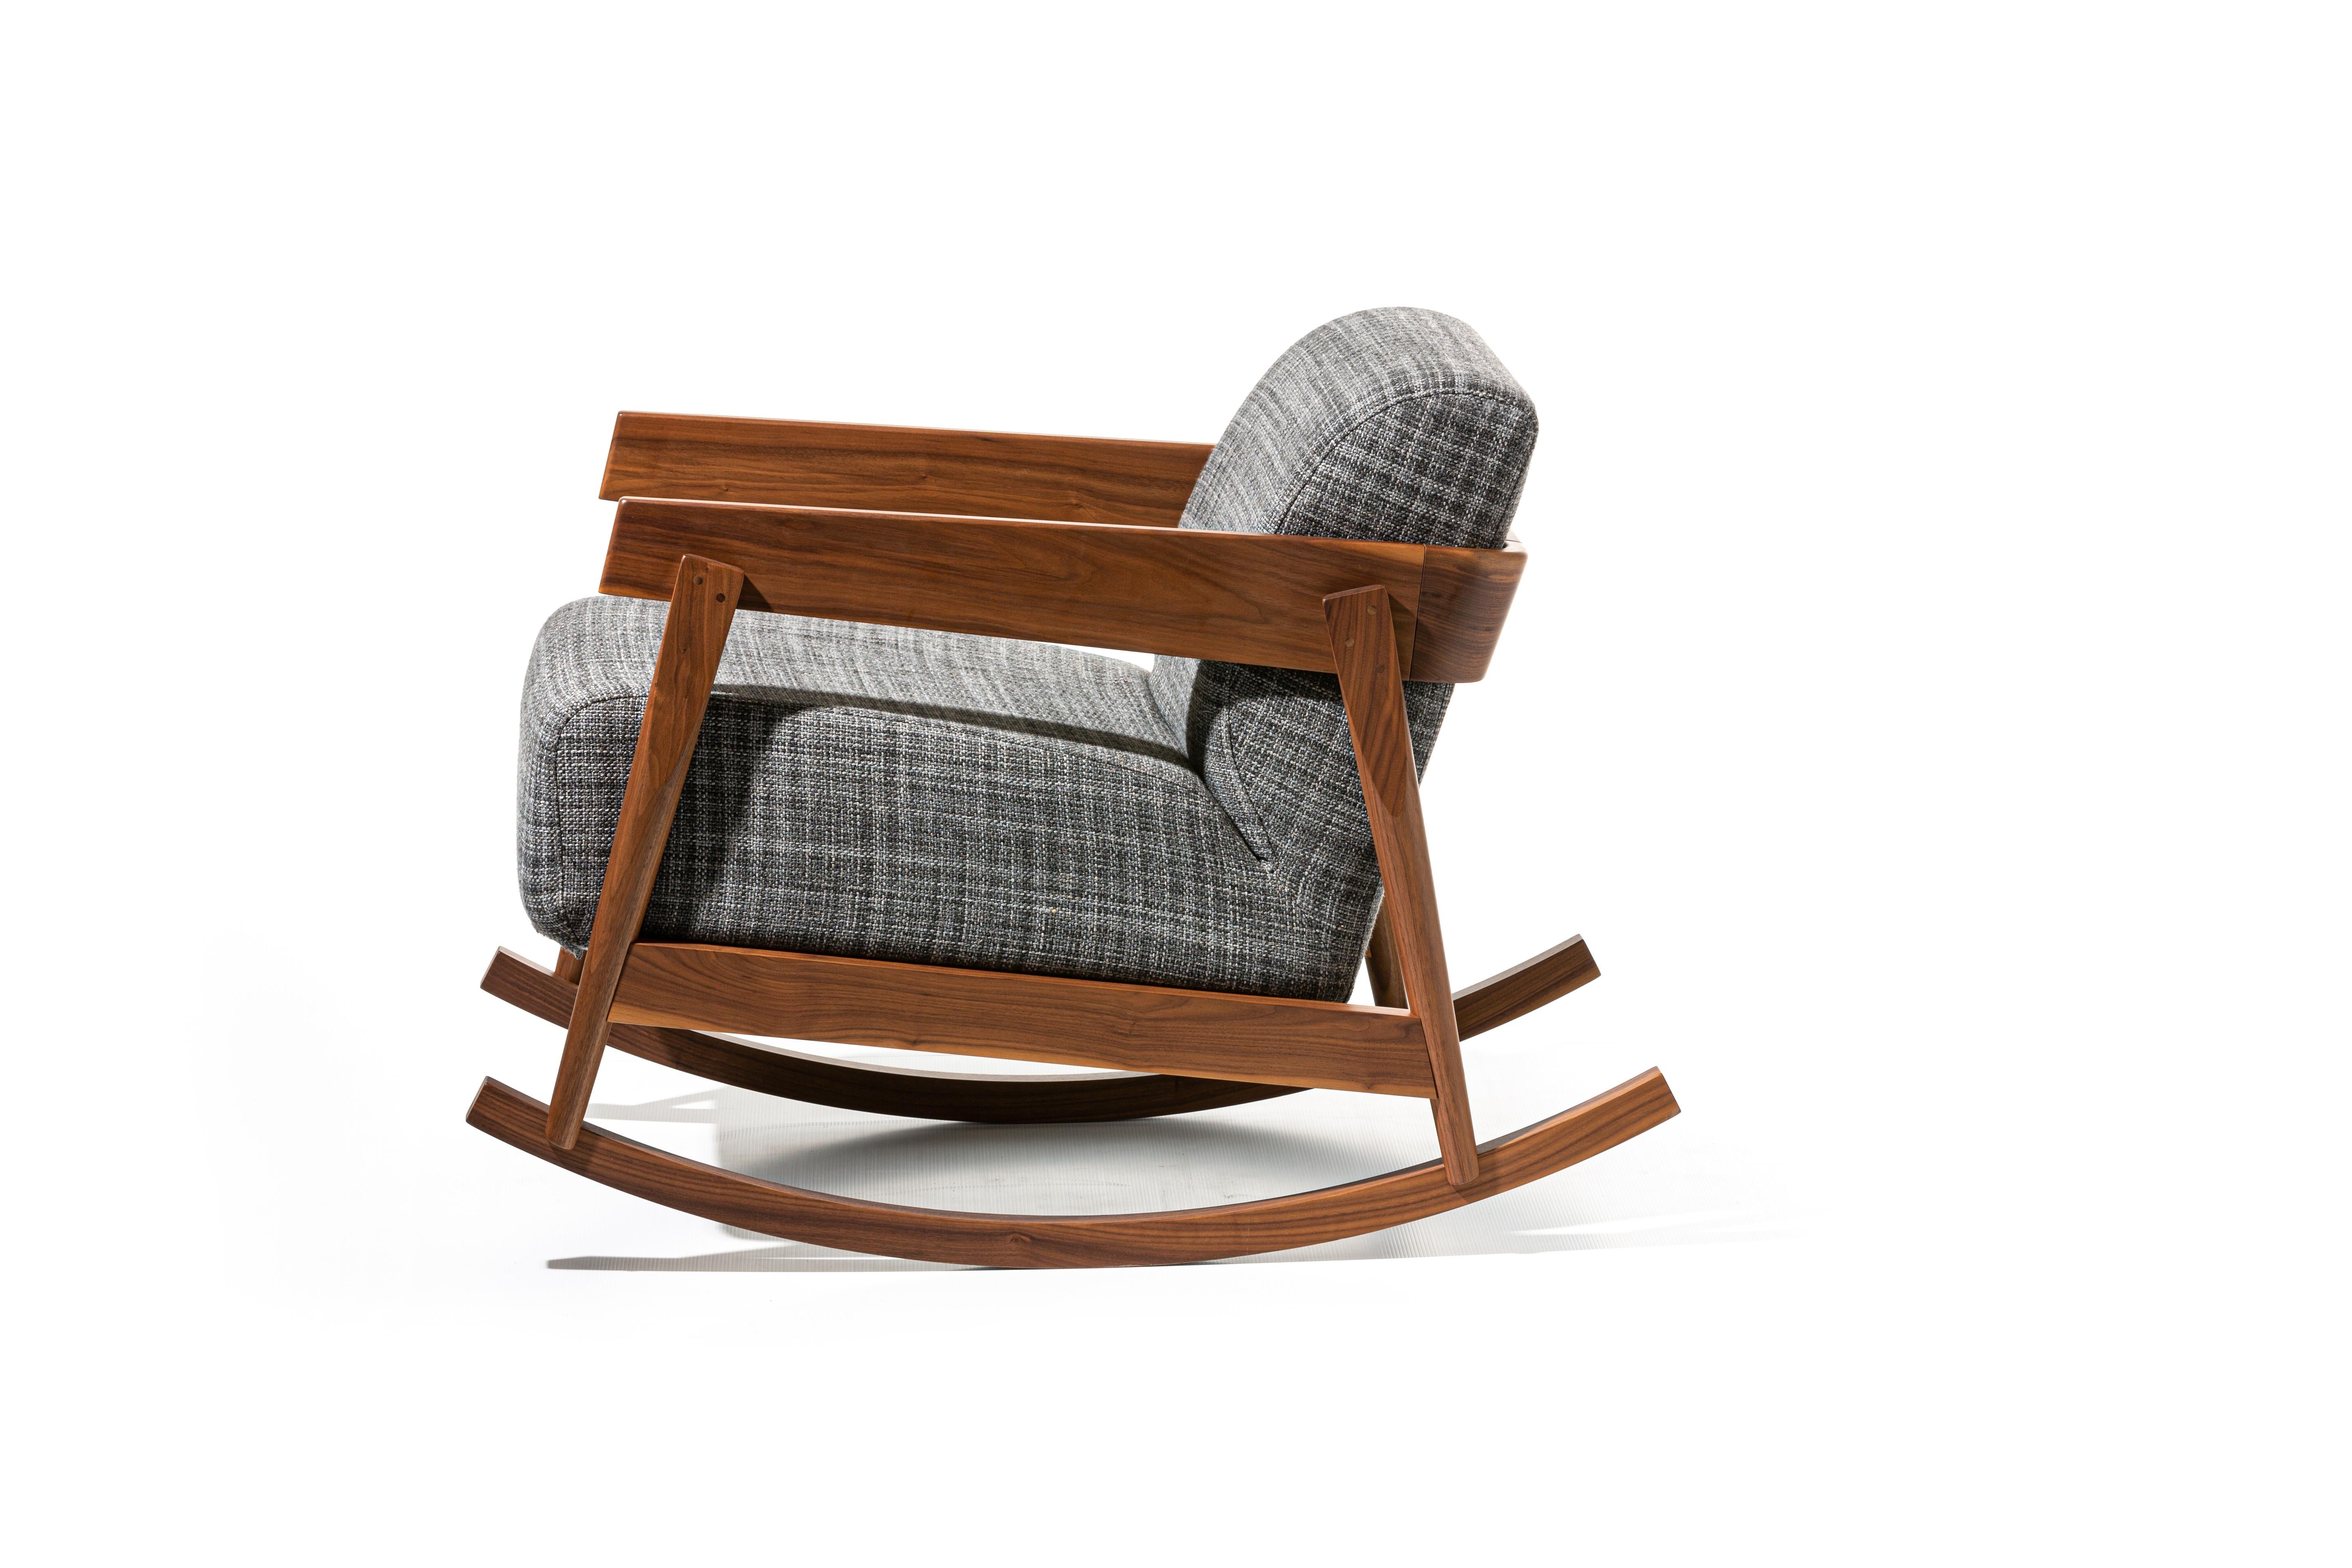 Rocking chair in solid natural Canaletto walnut, bleached oak or oak lacquered in white, grey, black, ocean or dove-grey, Brick 307 has the seat and backrest softened by a single cushion padded in polyurethane foam with a removable cover. The